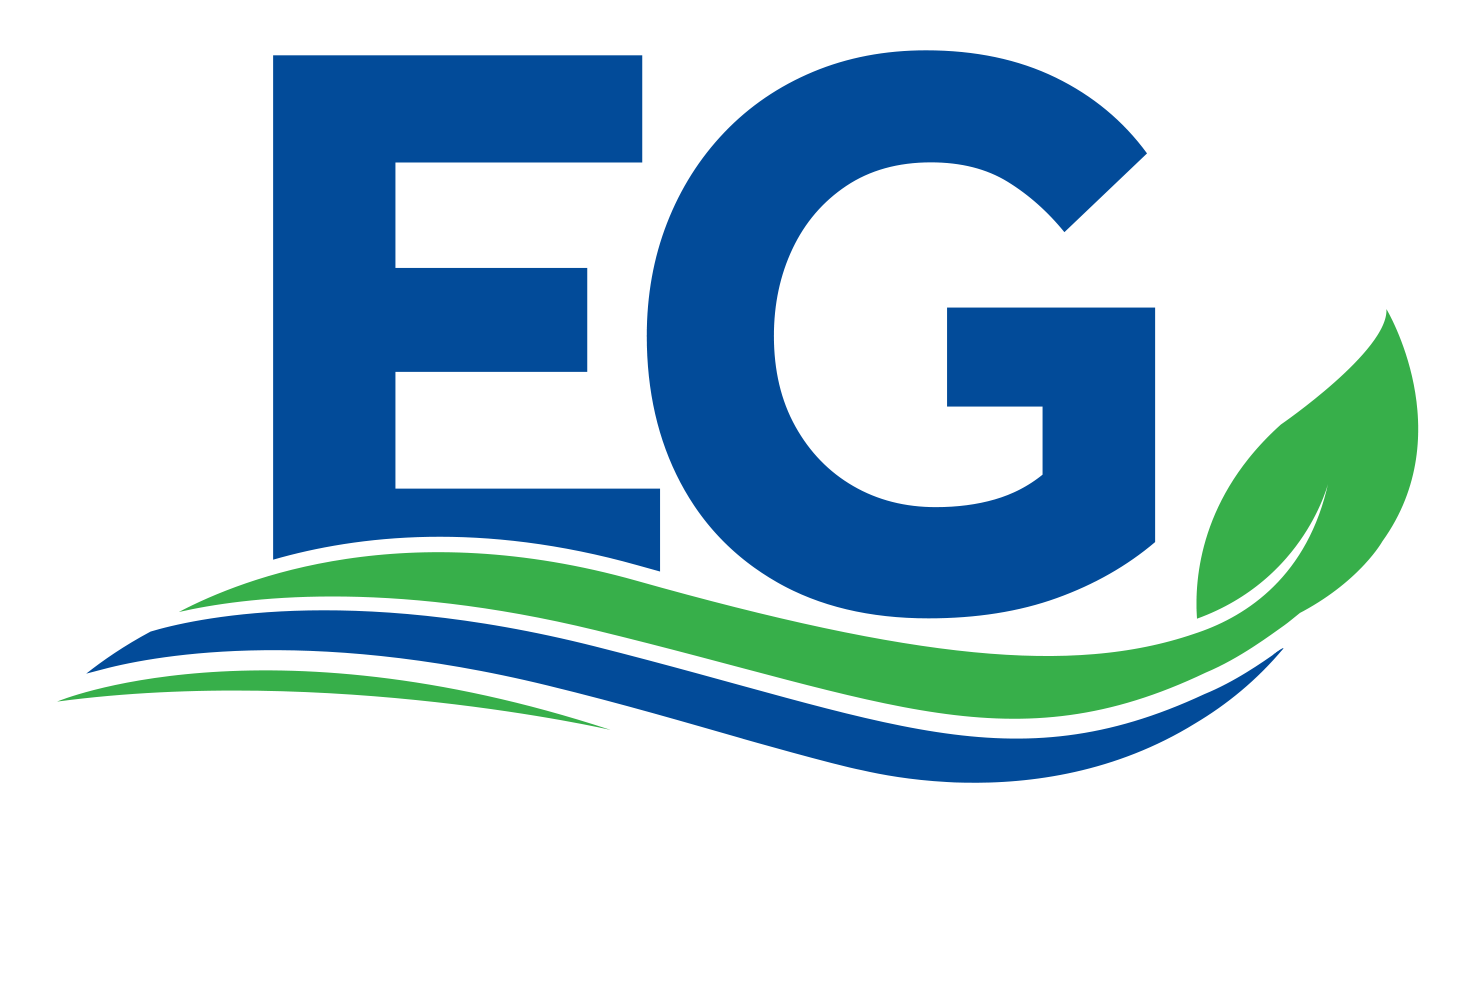 Town of East Gwillimbury